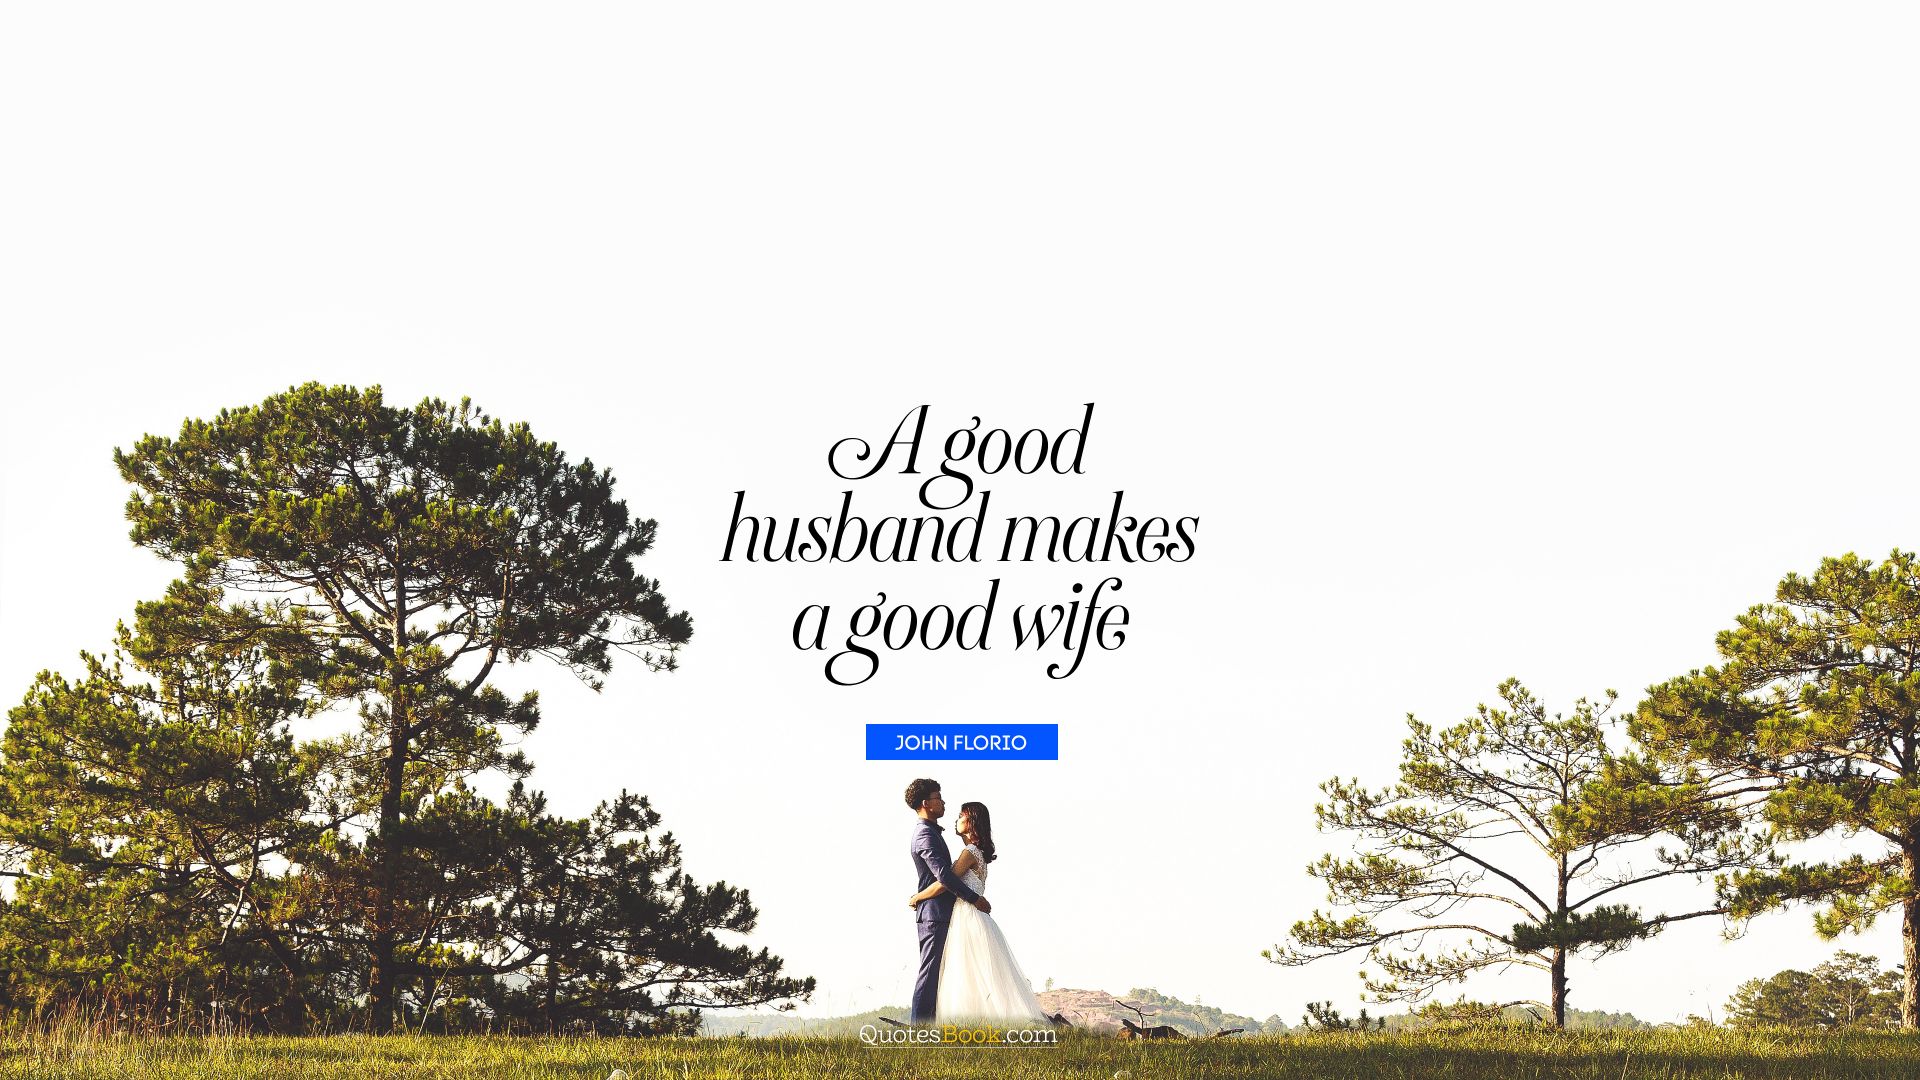 A good husband makes a good wife. - Quote by John Florio